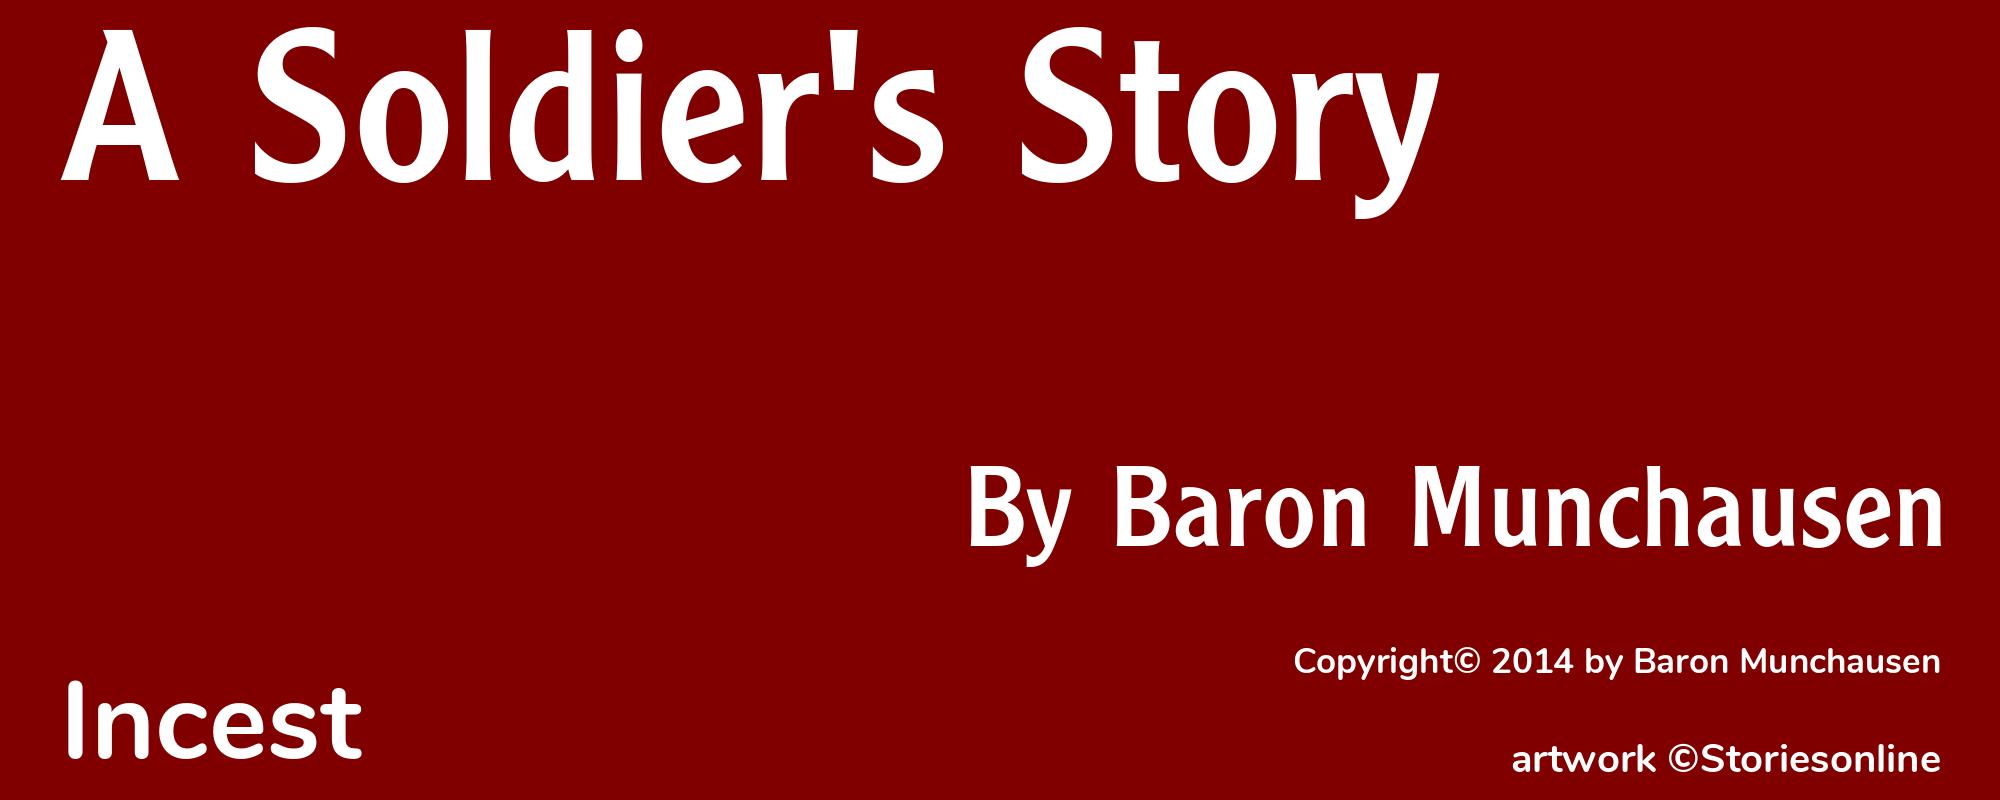 A Soldier's Story - Cover